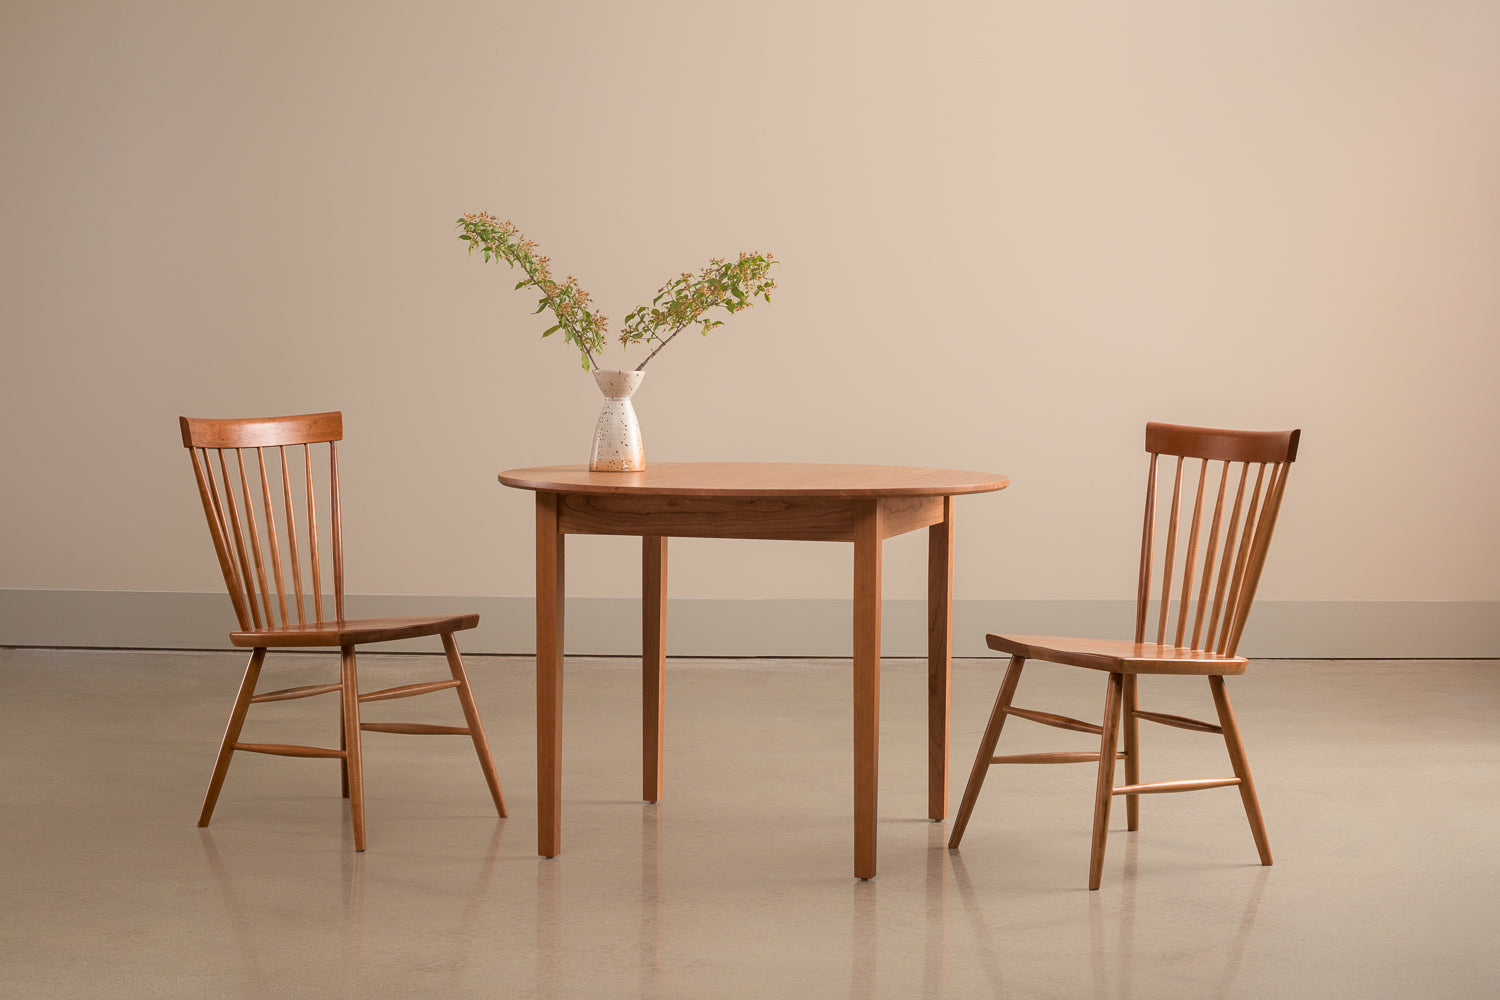 Harvest chairs and Shaker Round Dining Table in cherry with large leafy centerpiece